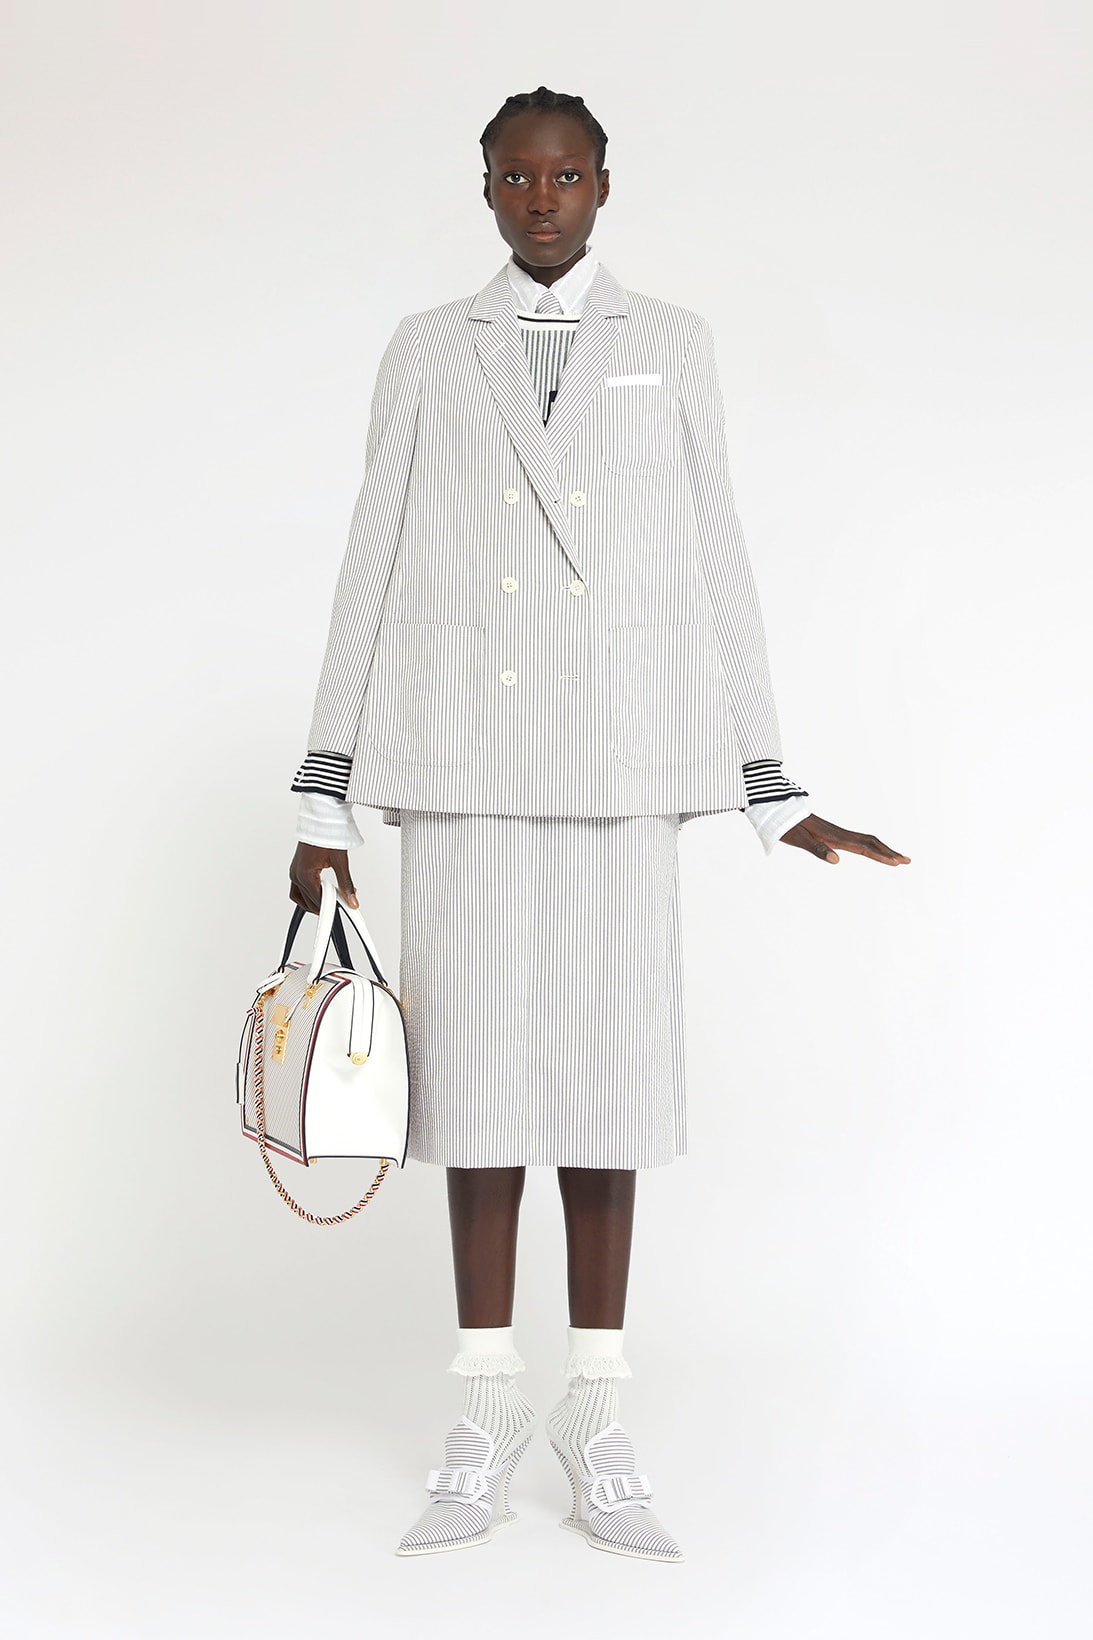 thom browne spring summer collection seersucker suits dresses bags fashion